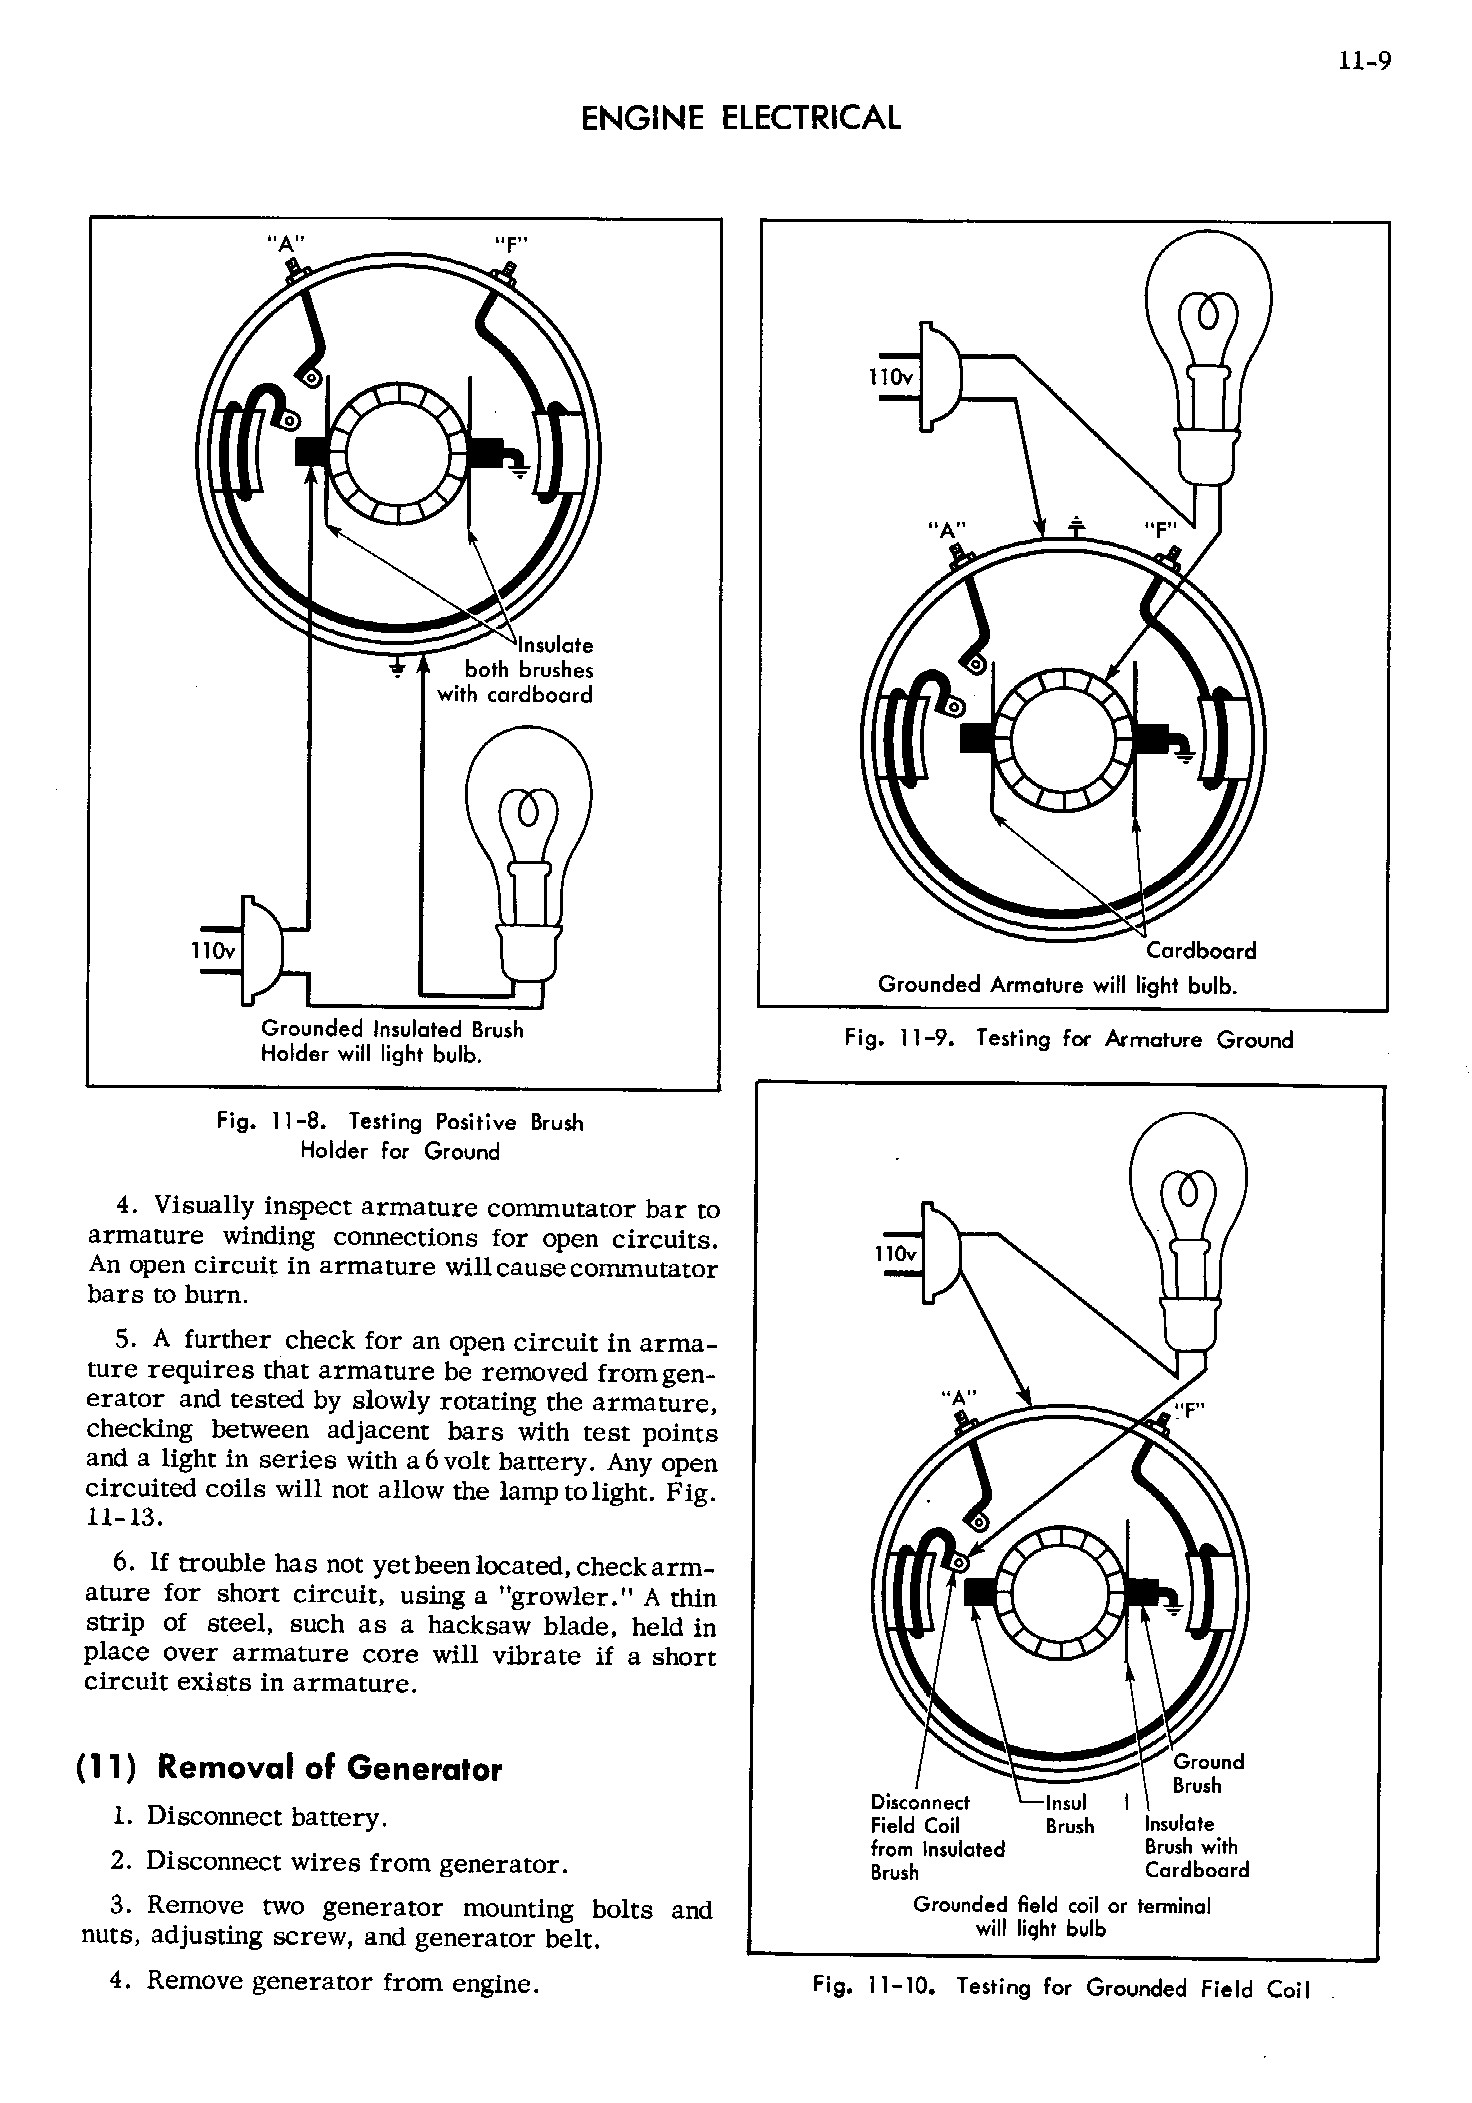 1952 Cadillac Shop Manual- Engine Electrical Page 9 of 20